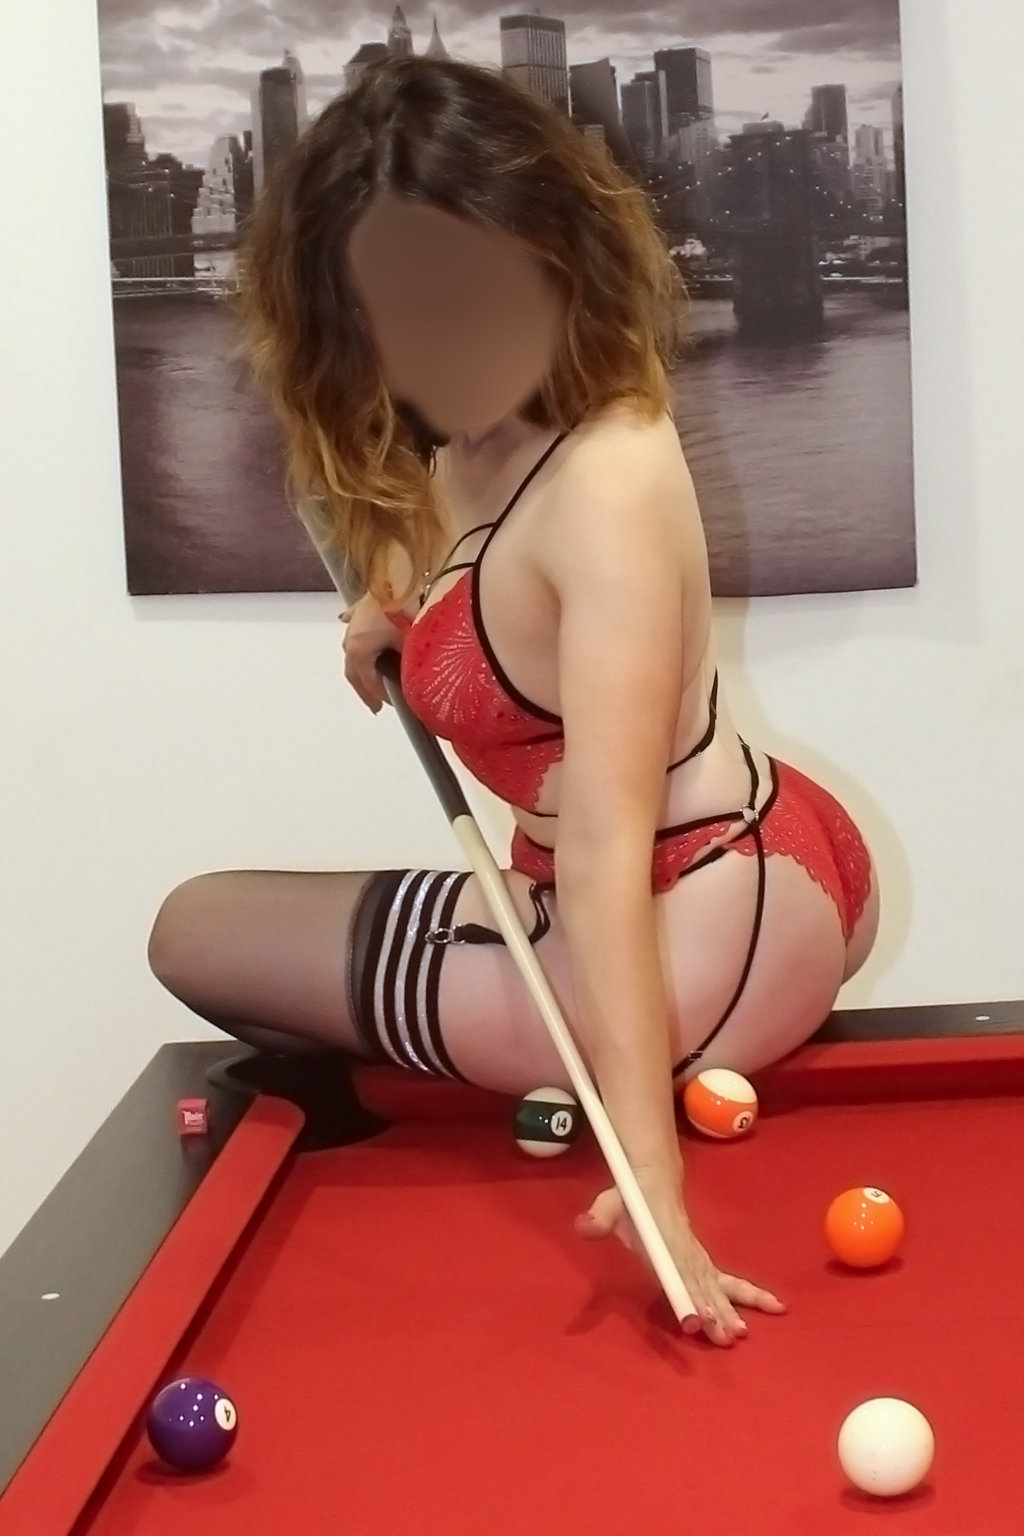 Sophia sex Female,5'3 or under(160cm),Tall,G cup,Transsexuals